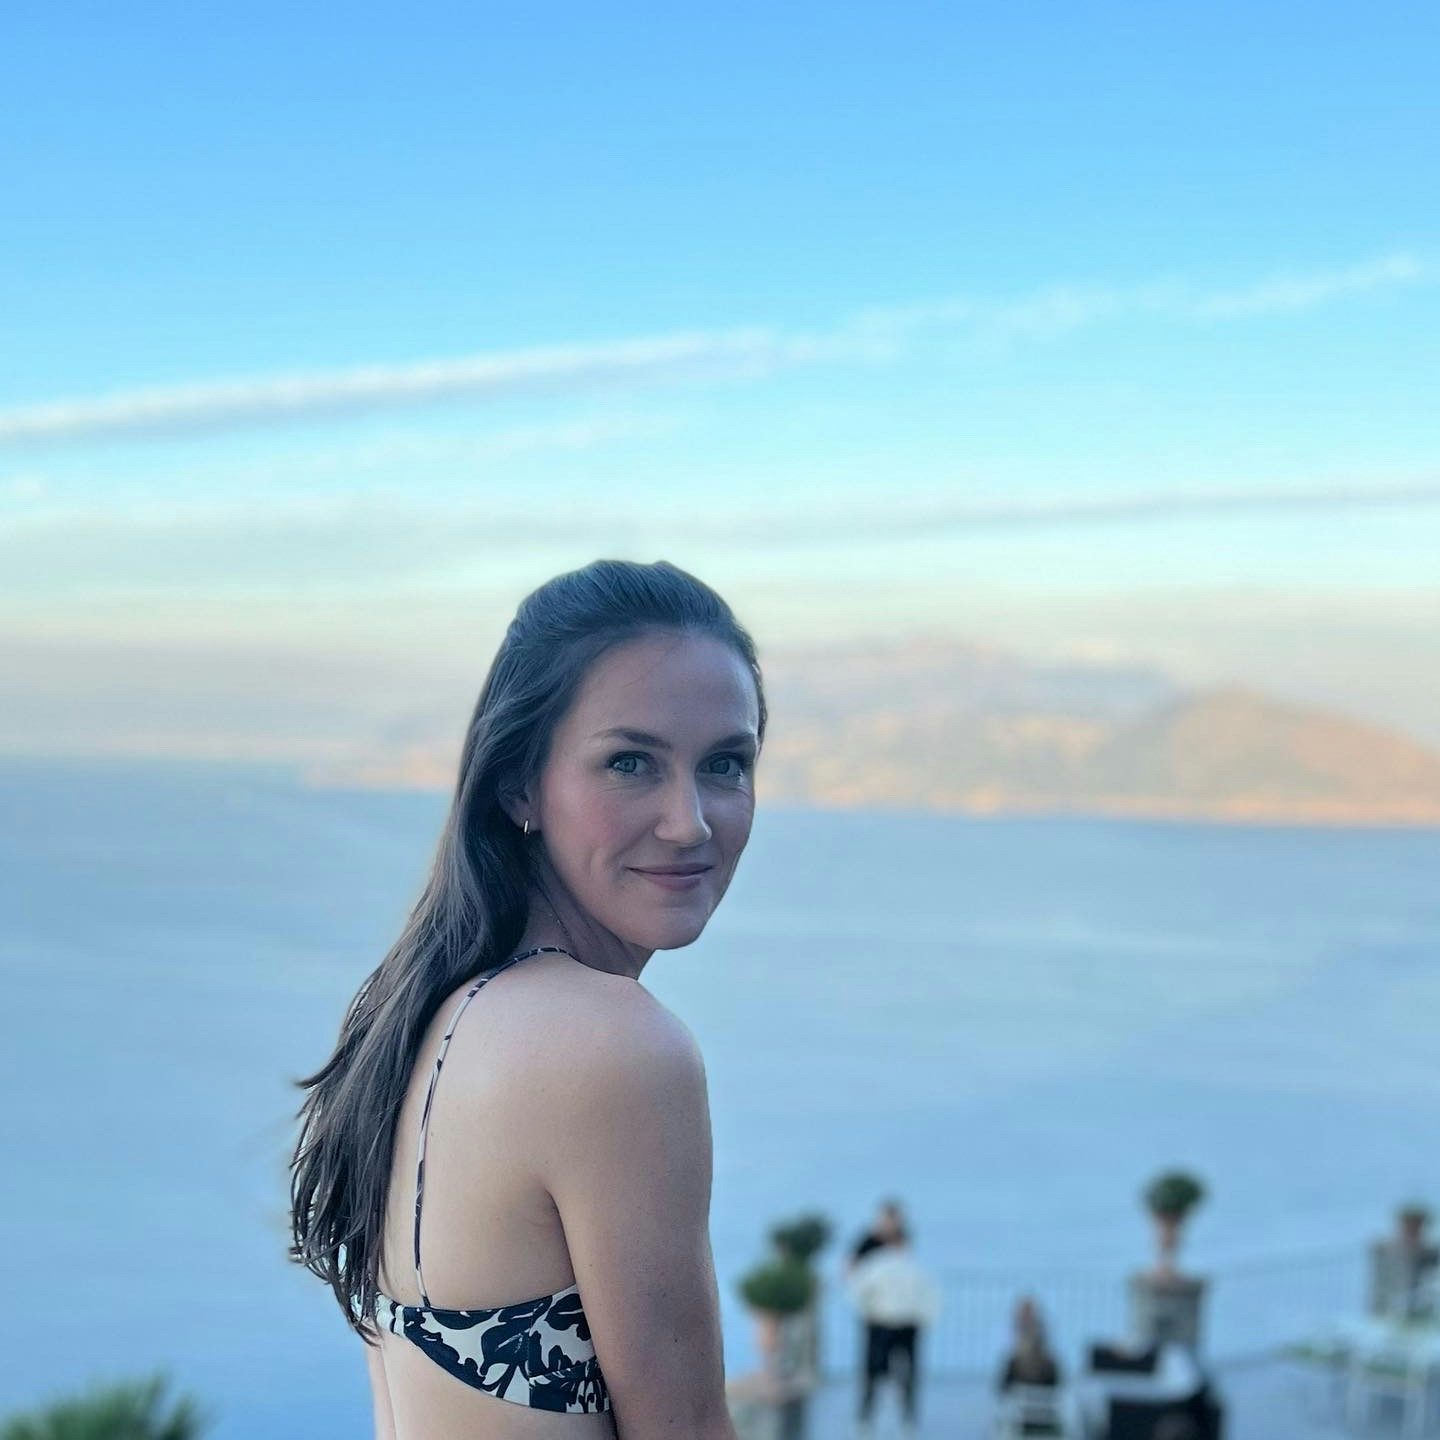 Travel Advisor Grace Hilty wearing a tank top standing in front of blue water and brown mountains.